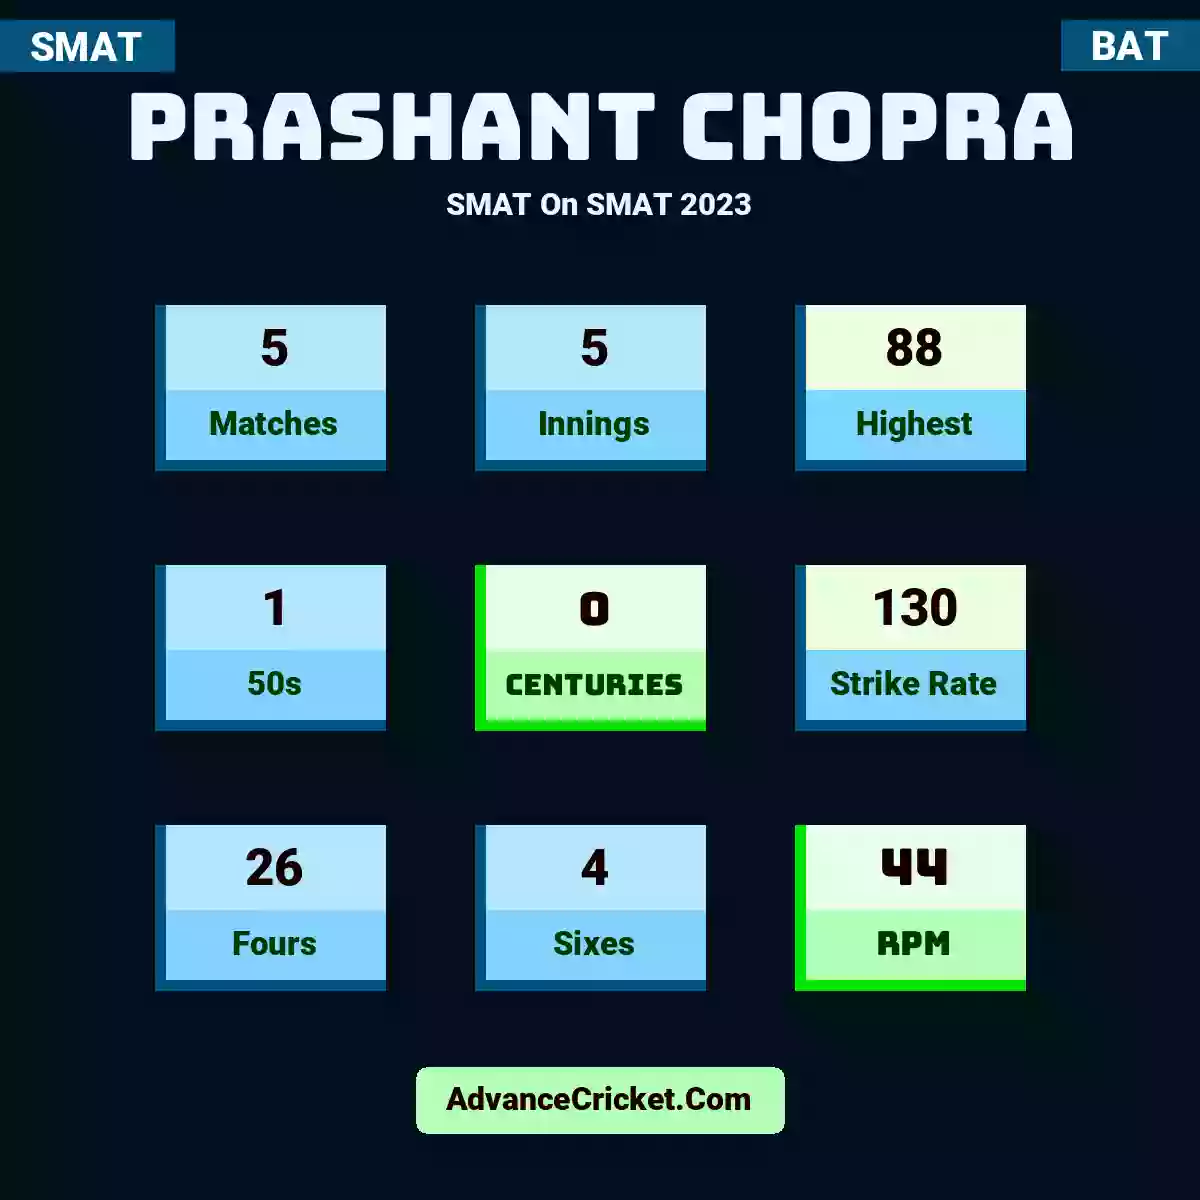 Prashant Chopra SMAT  On SMAT 2023, Prashant Chopra played 5 matches, scored 88 runs as highest, 1 half-centuries, and 0 centuries, with a strike rate of 130. P.Chopra hit 26 fours and 4 sixes, with an RPM of 44.